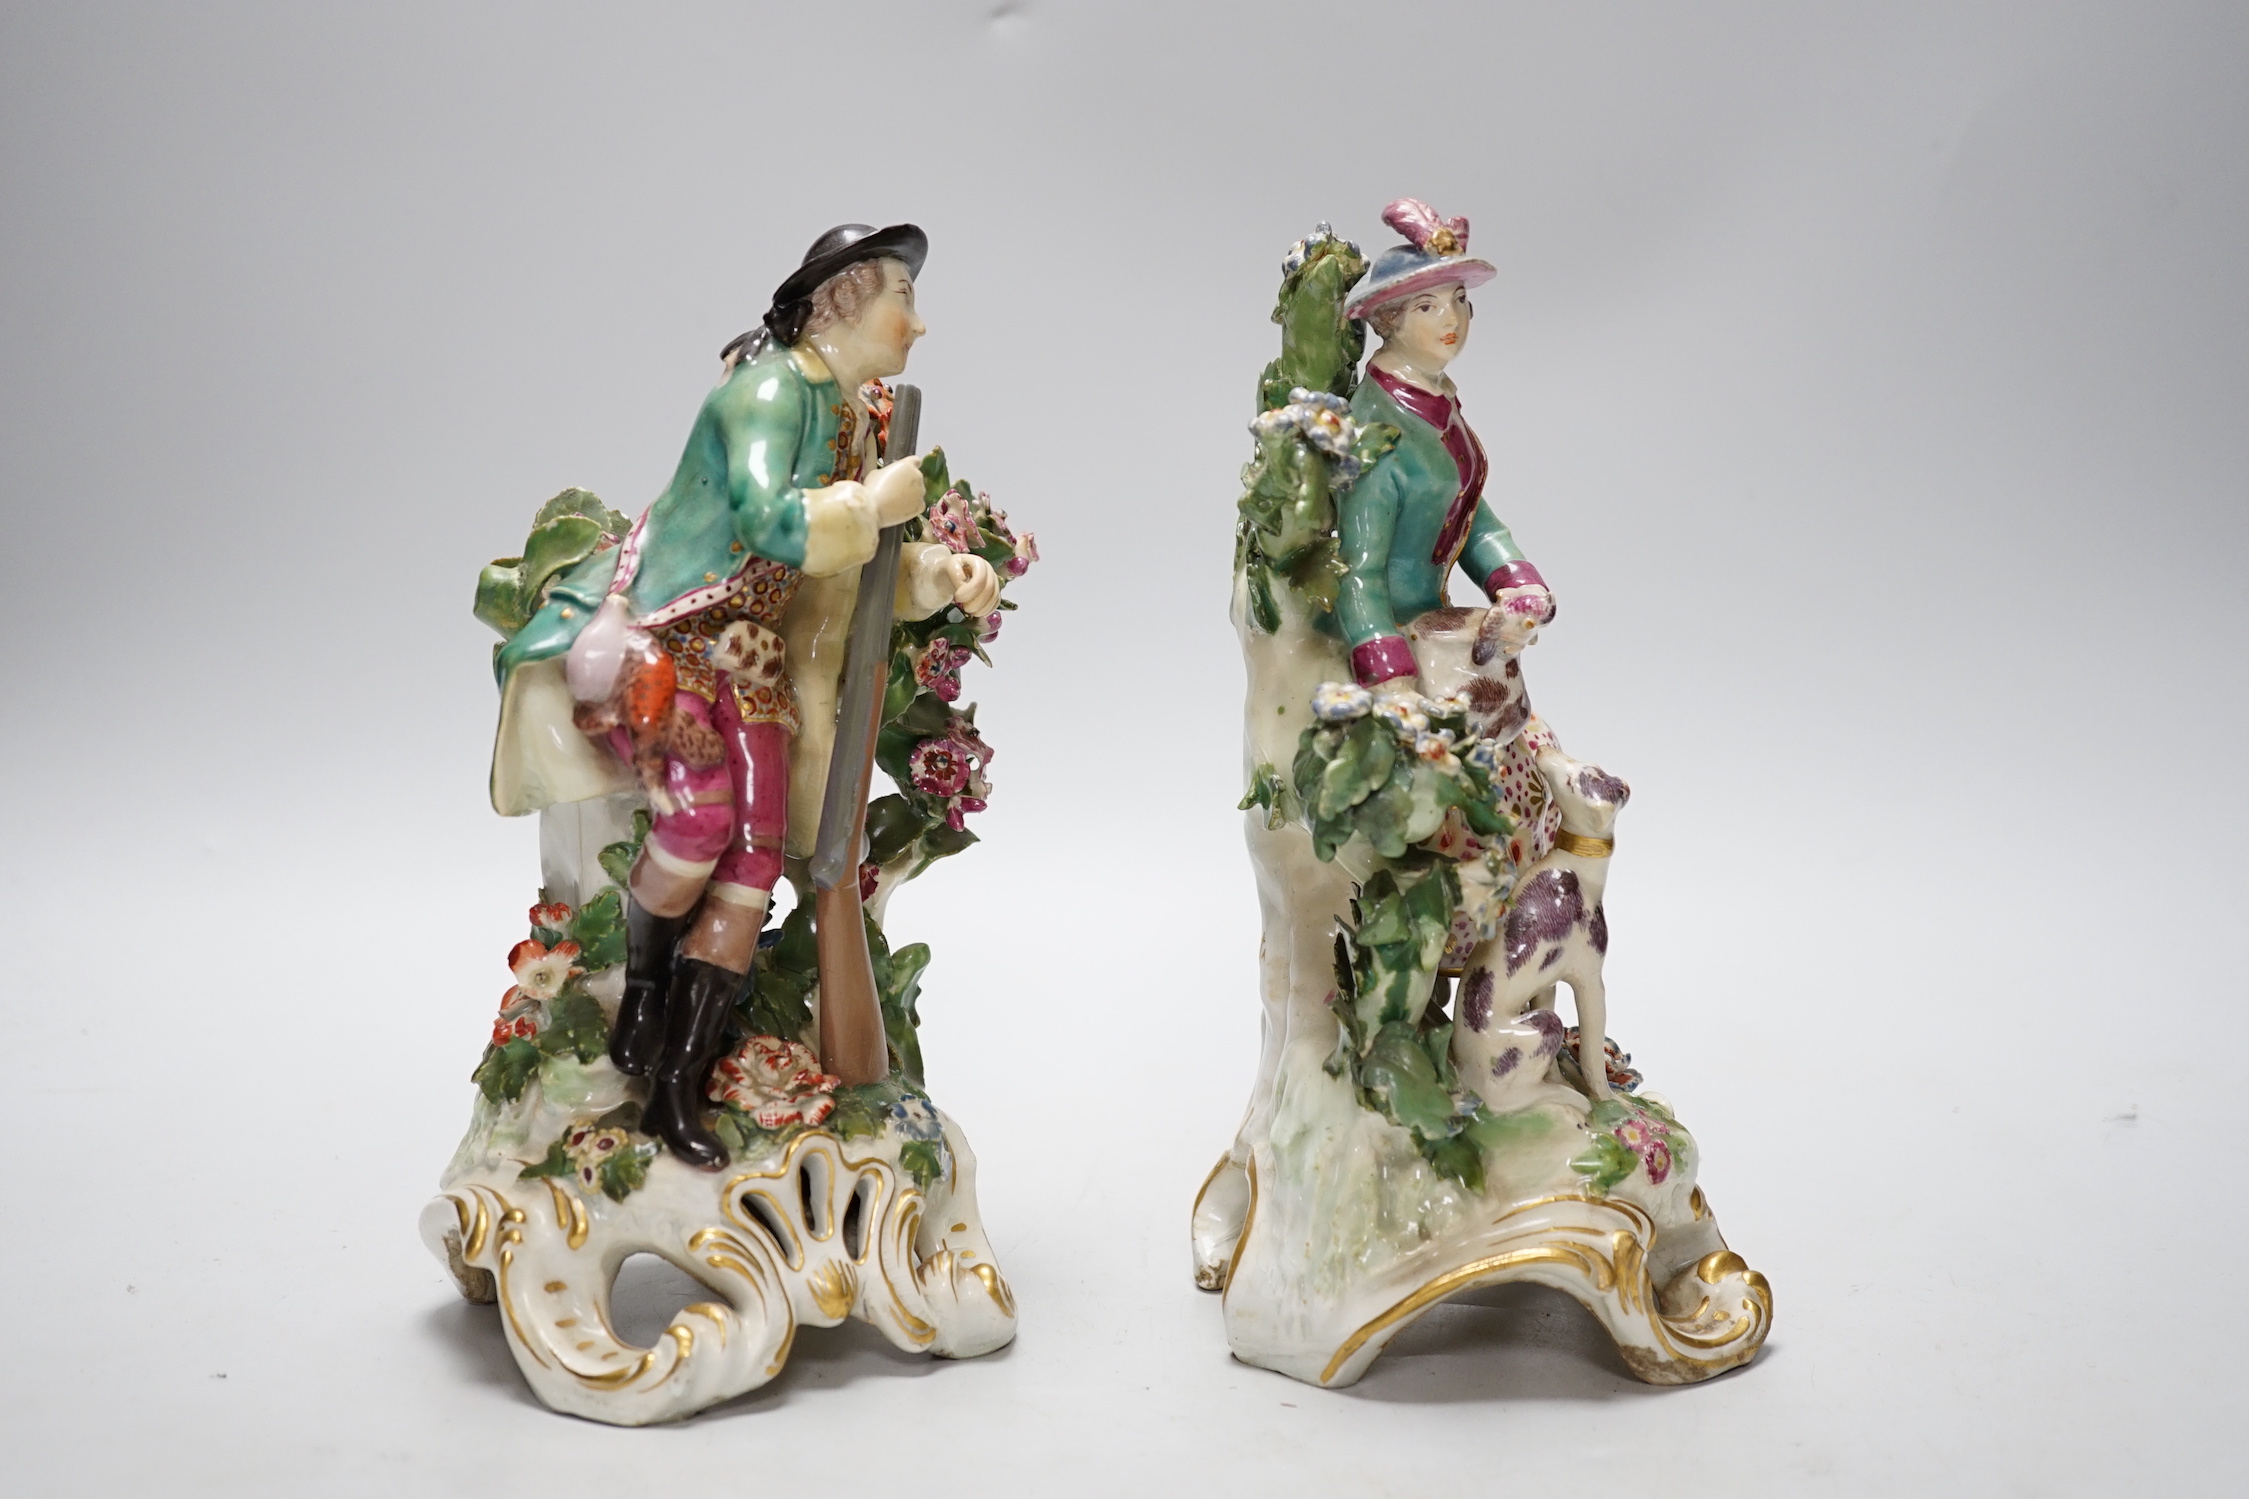 A pair of Chelsea gold anchor period figures wearing 18th century dress, c.1760-65, 22cm